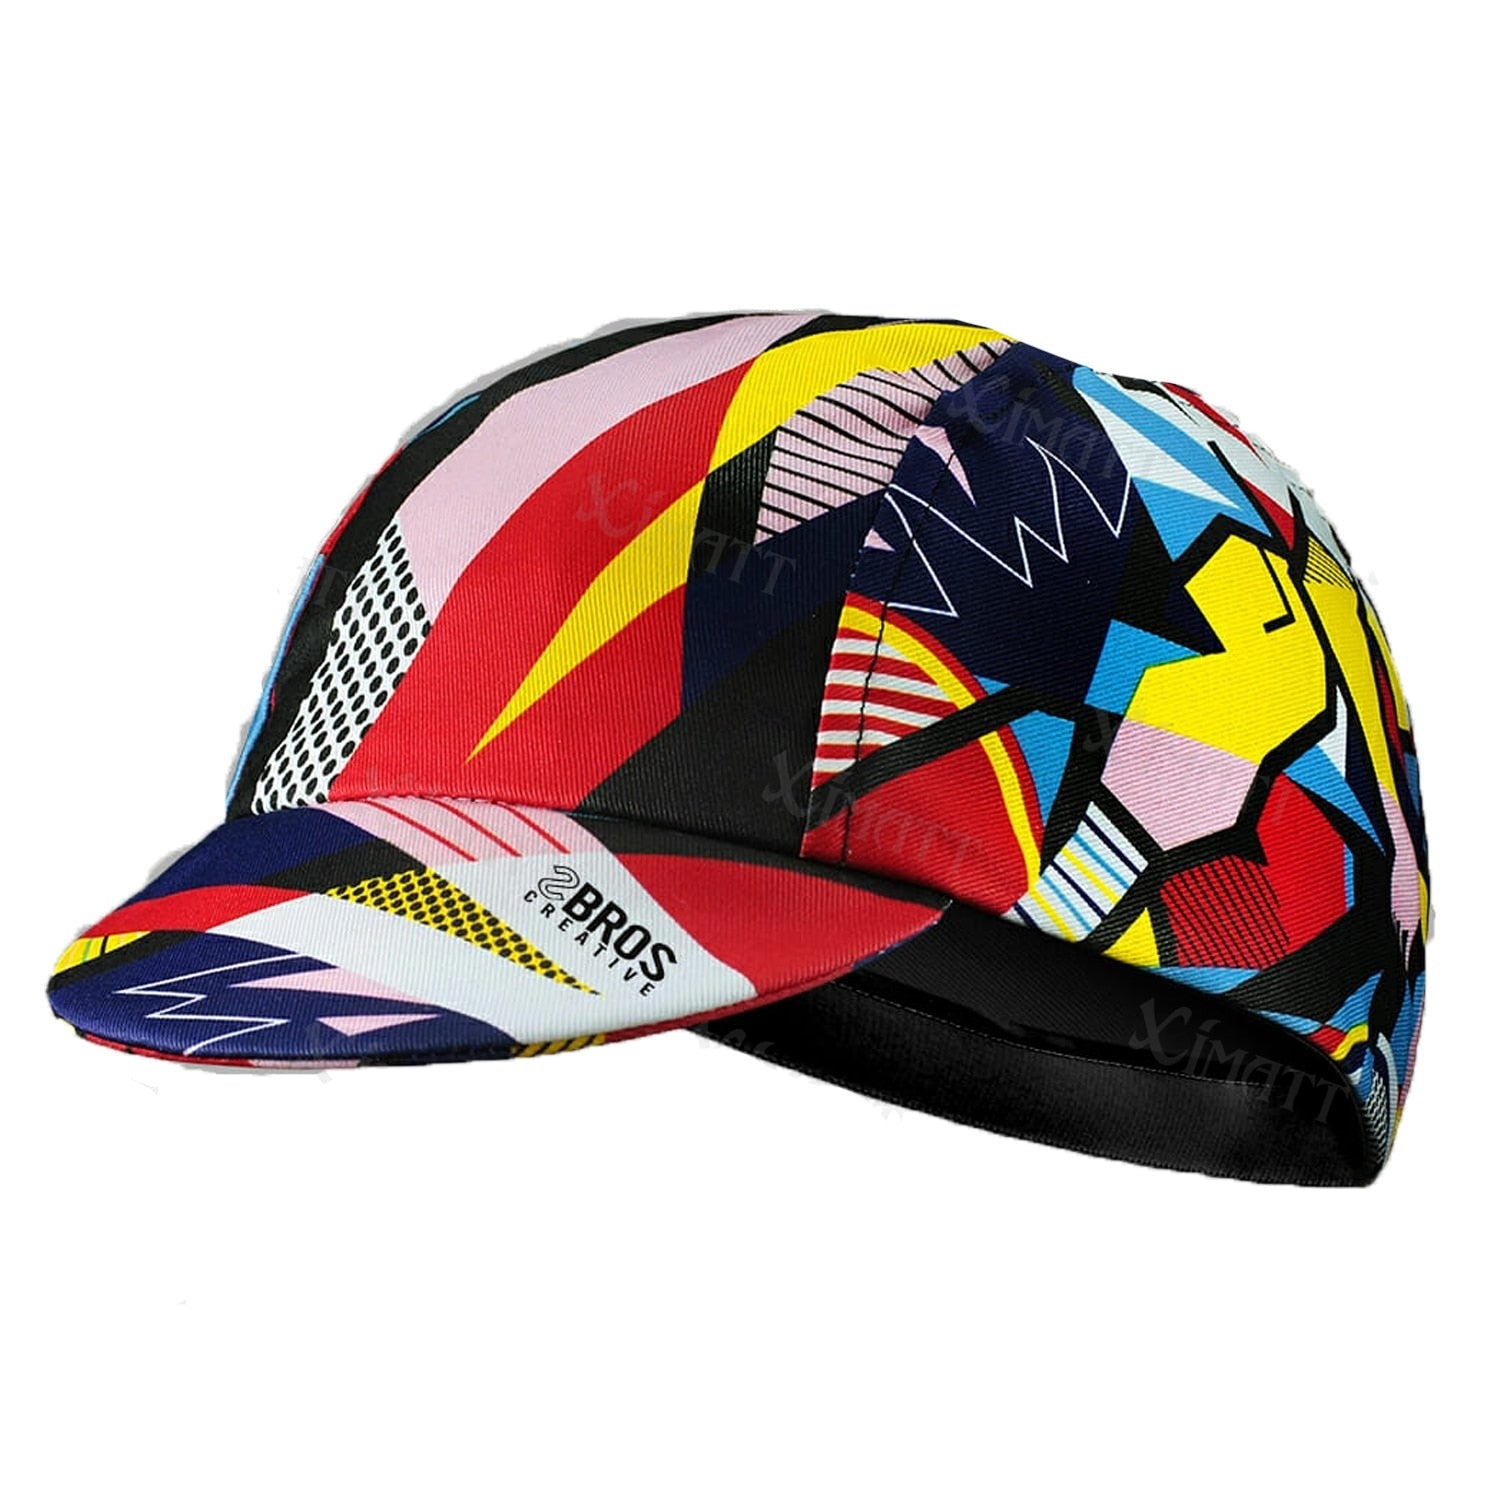 Colorful Polyester Cycling Caps Quick Drying Men And Women Wear Run Climb Play Football Surf By Bike Sports Visors